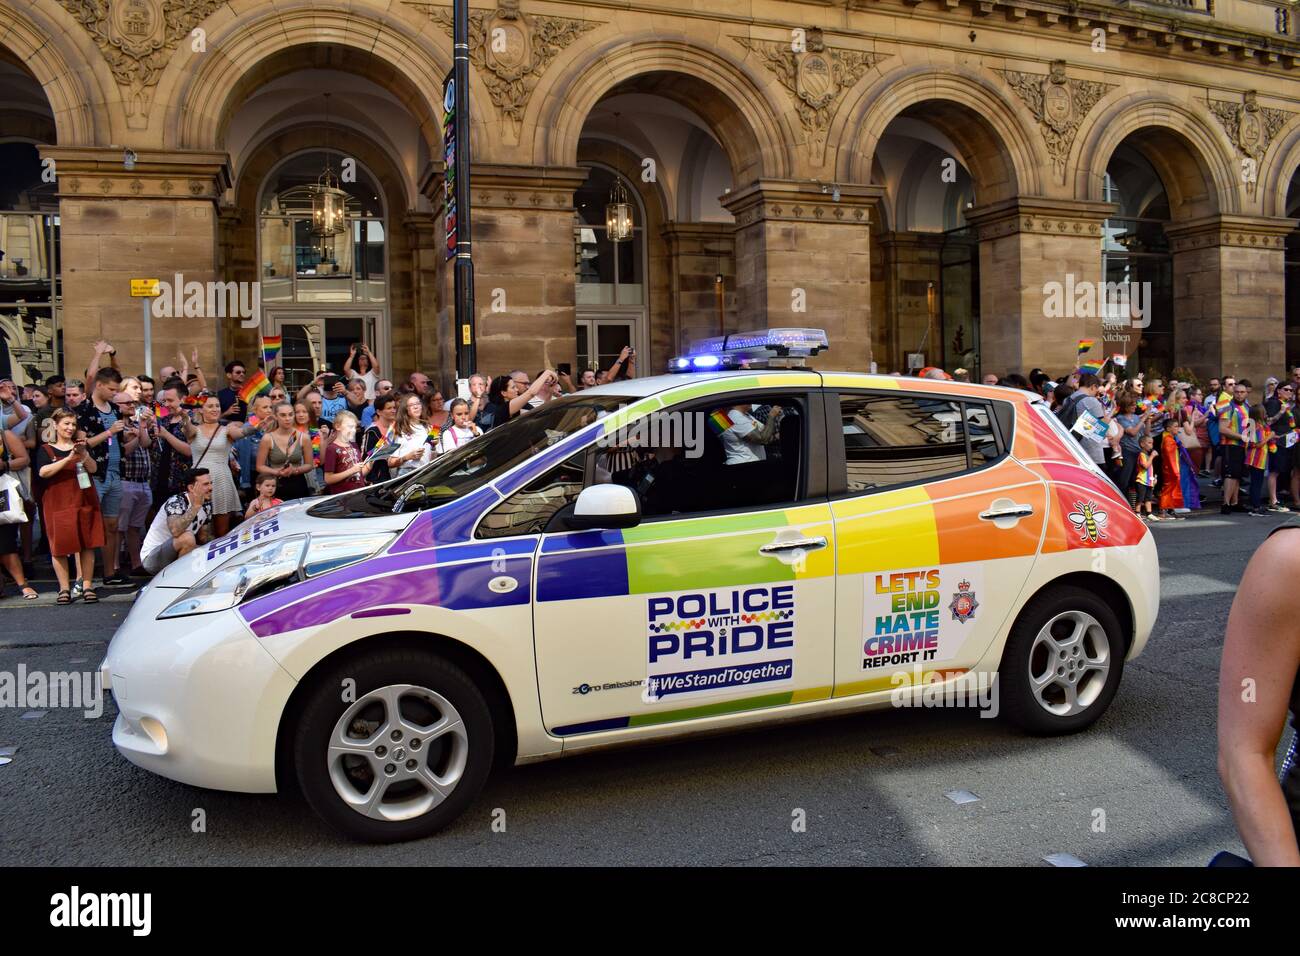 Pride parade passing in front of Radisson Hotel Manchester UK. Police car bearing Police with Pride hate crime logo and Manchester bee symbol Stock Photo